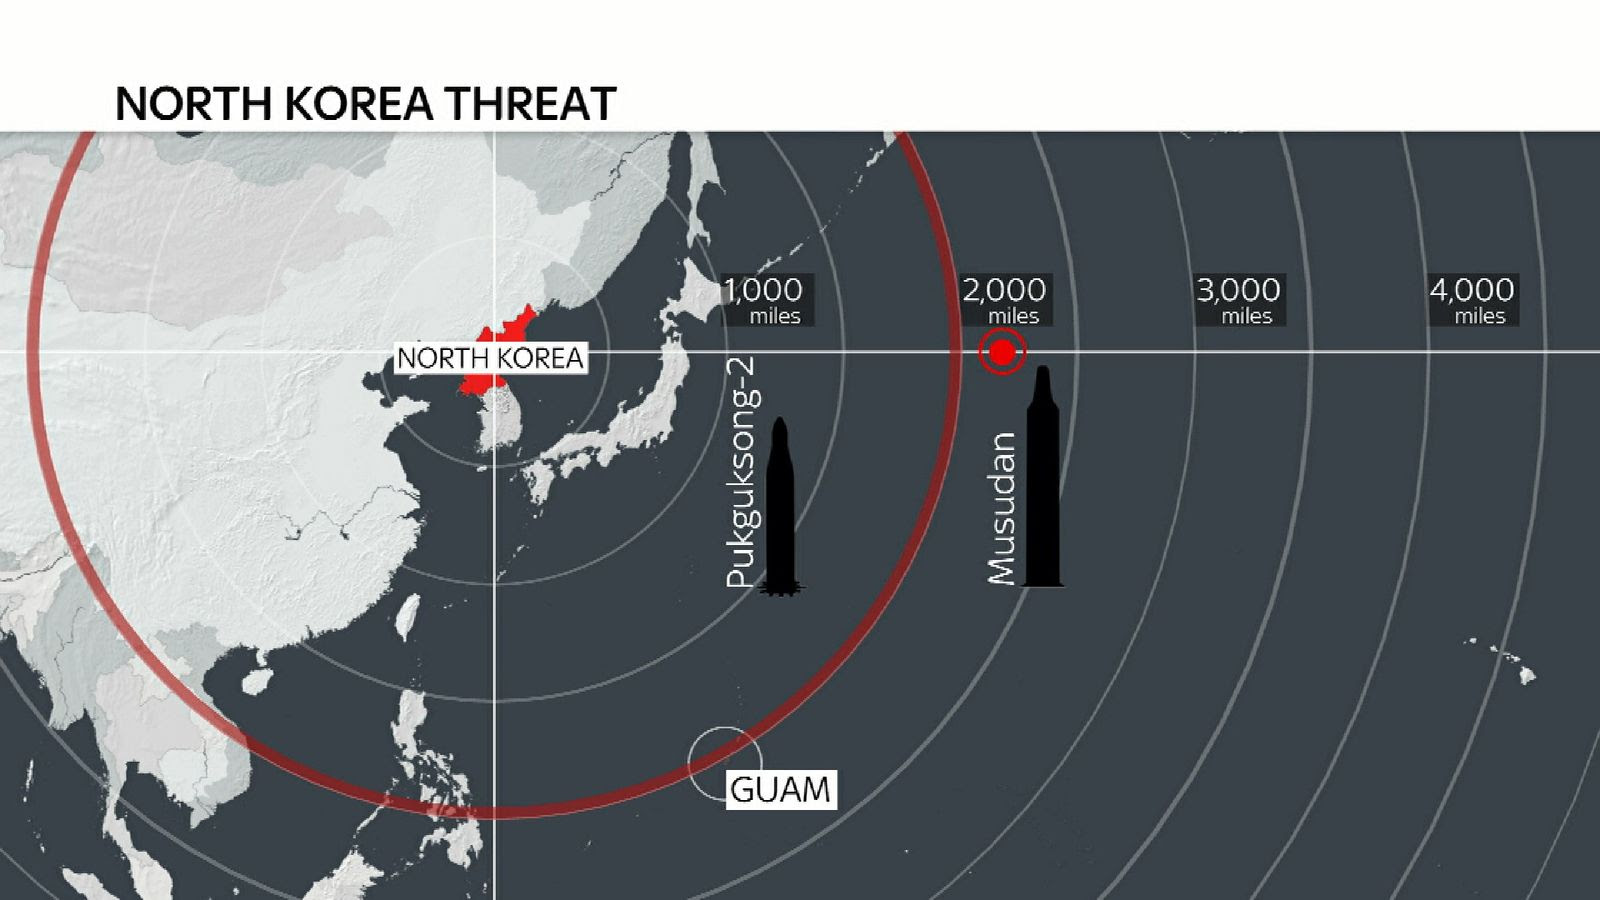 North Korea&#39;s missiles would need to travel around 2000 miles to reach Guam